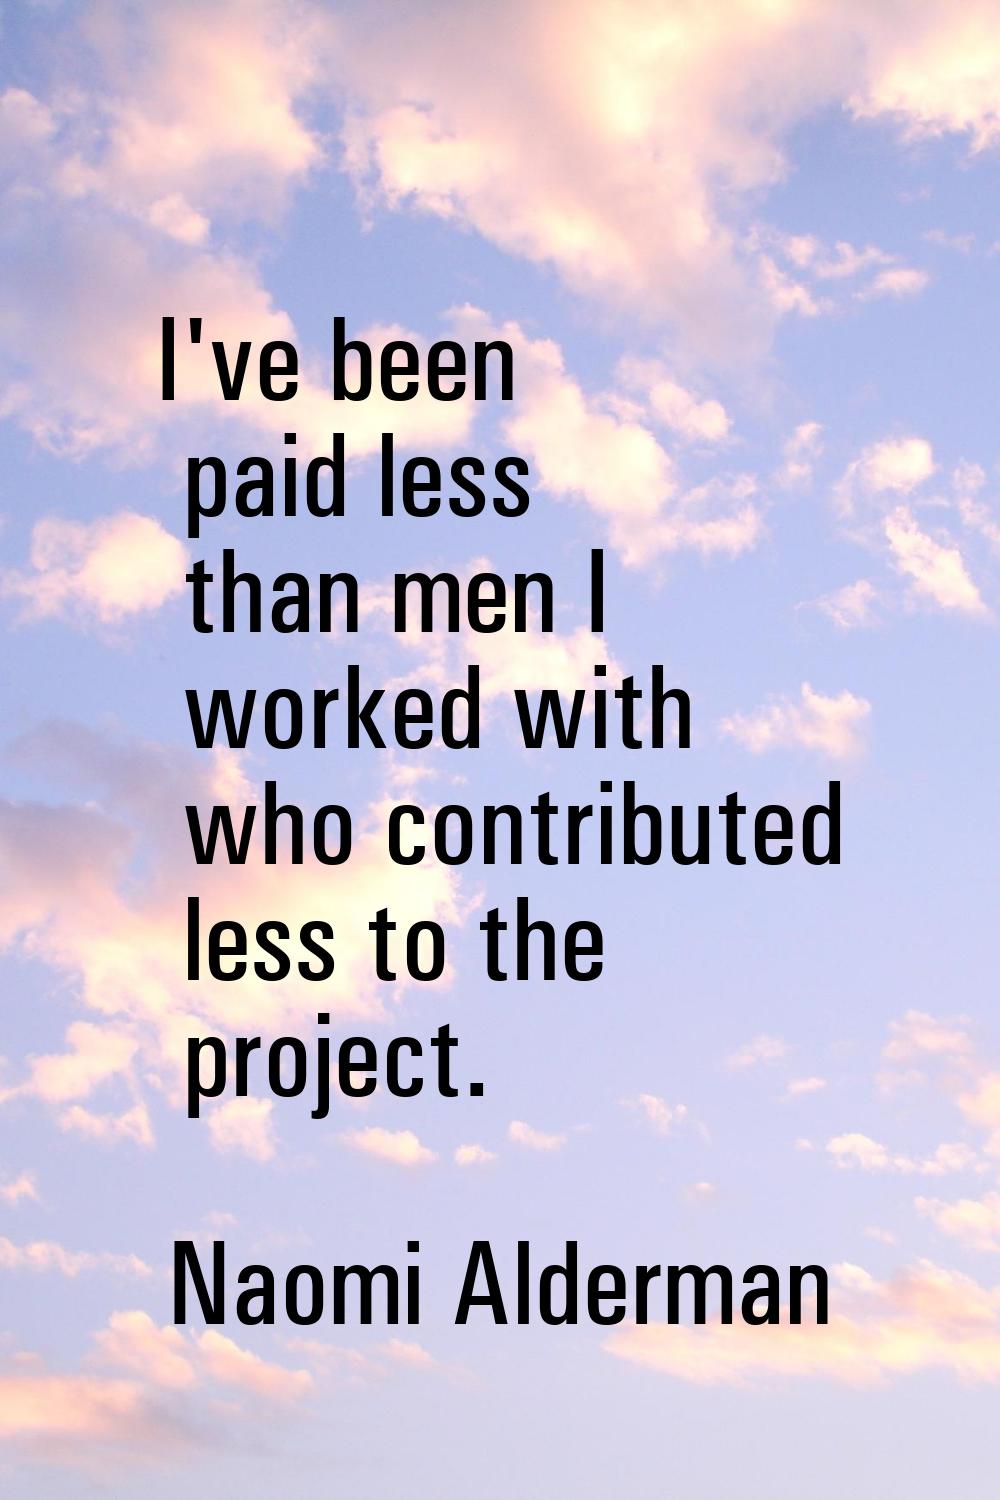 I've been paid less than men I worked with who contributed less to the project.